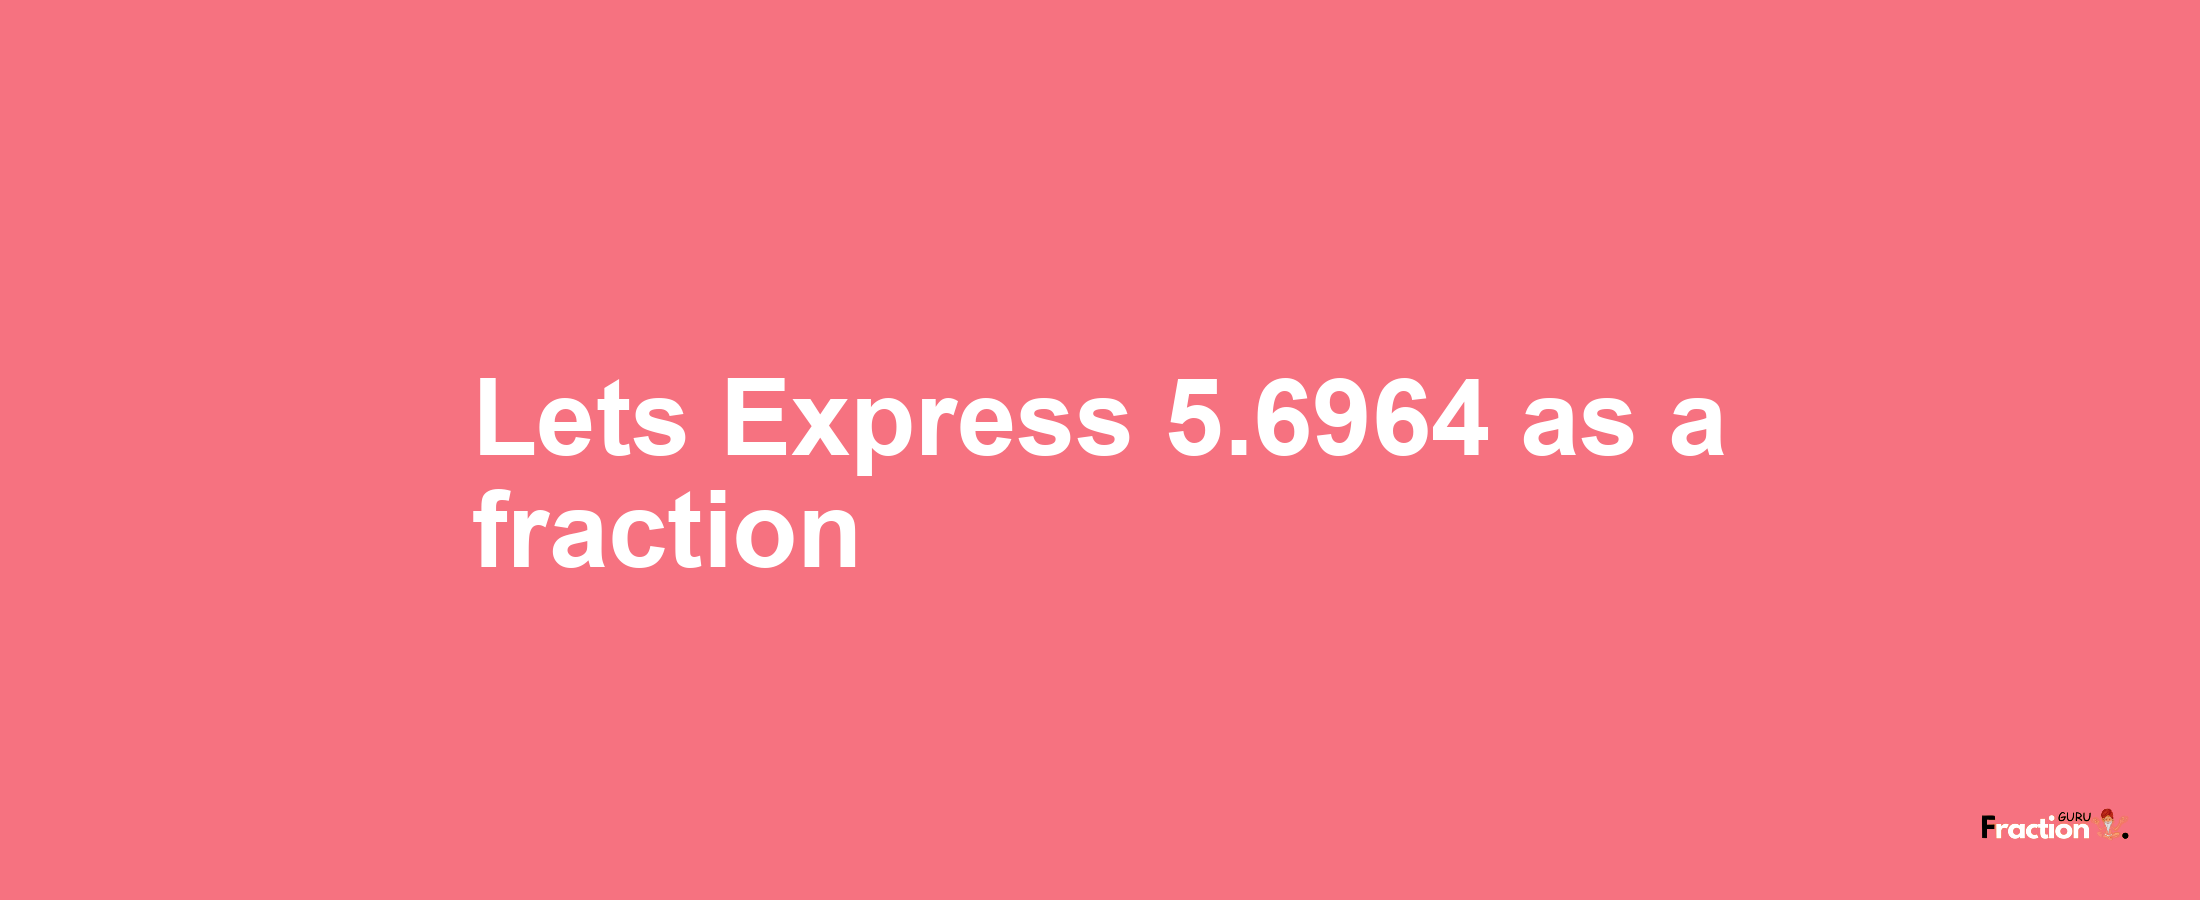 Lets Express 5.6964 as afraction